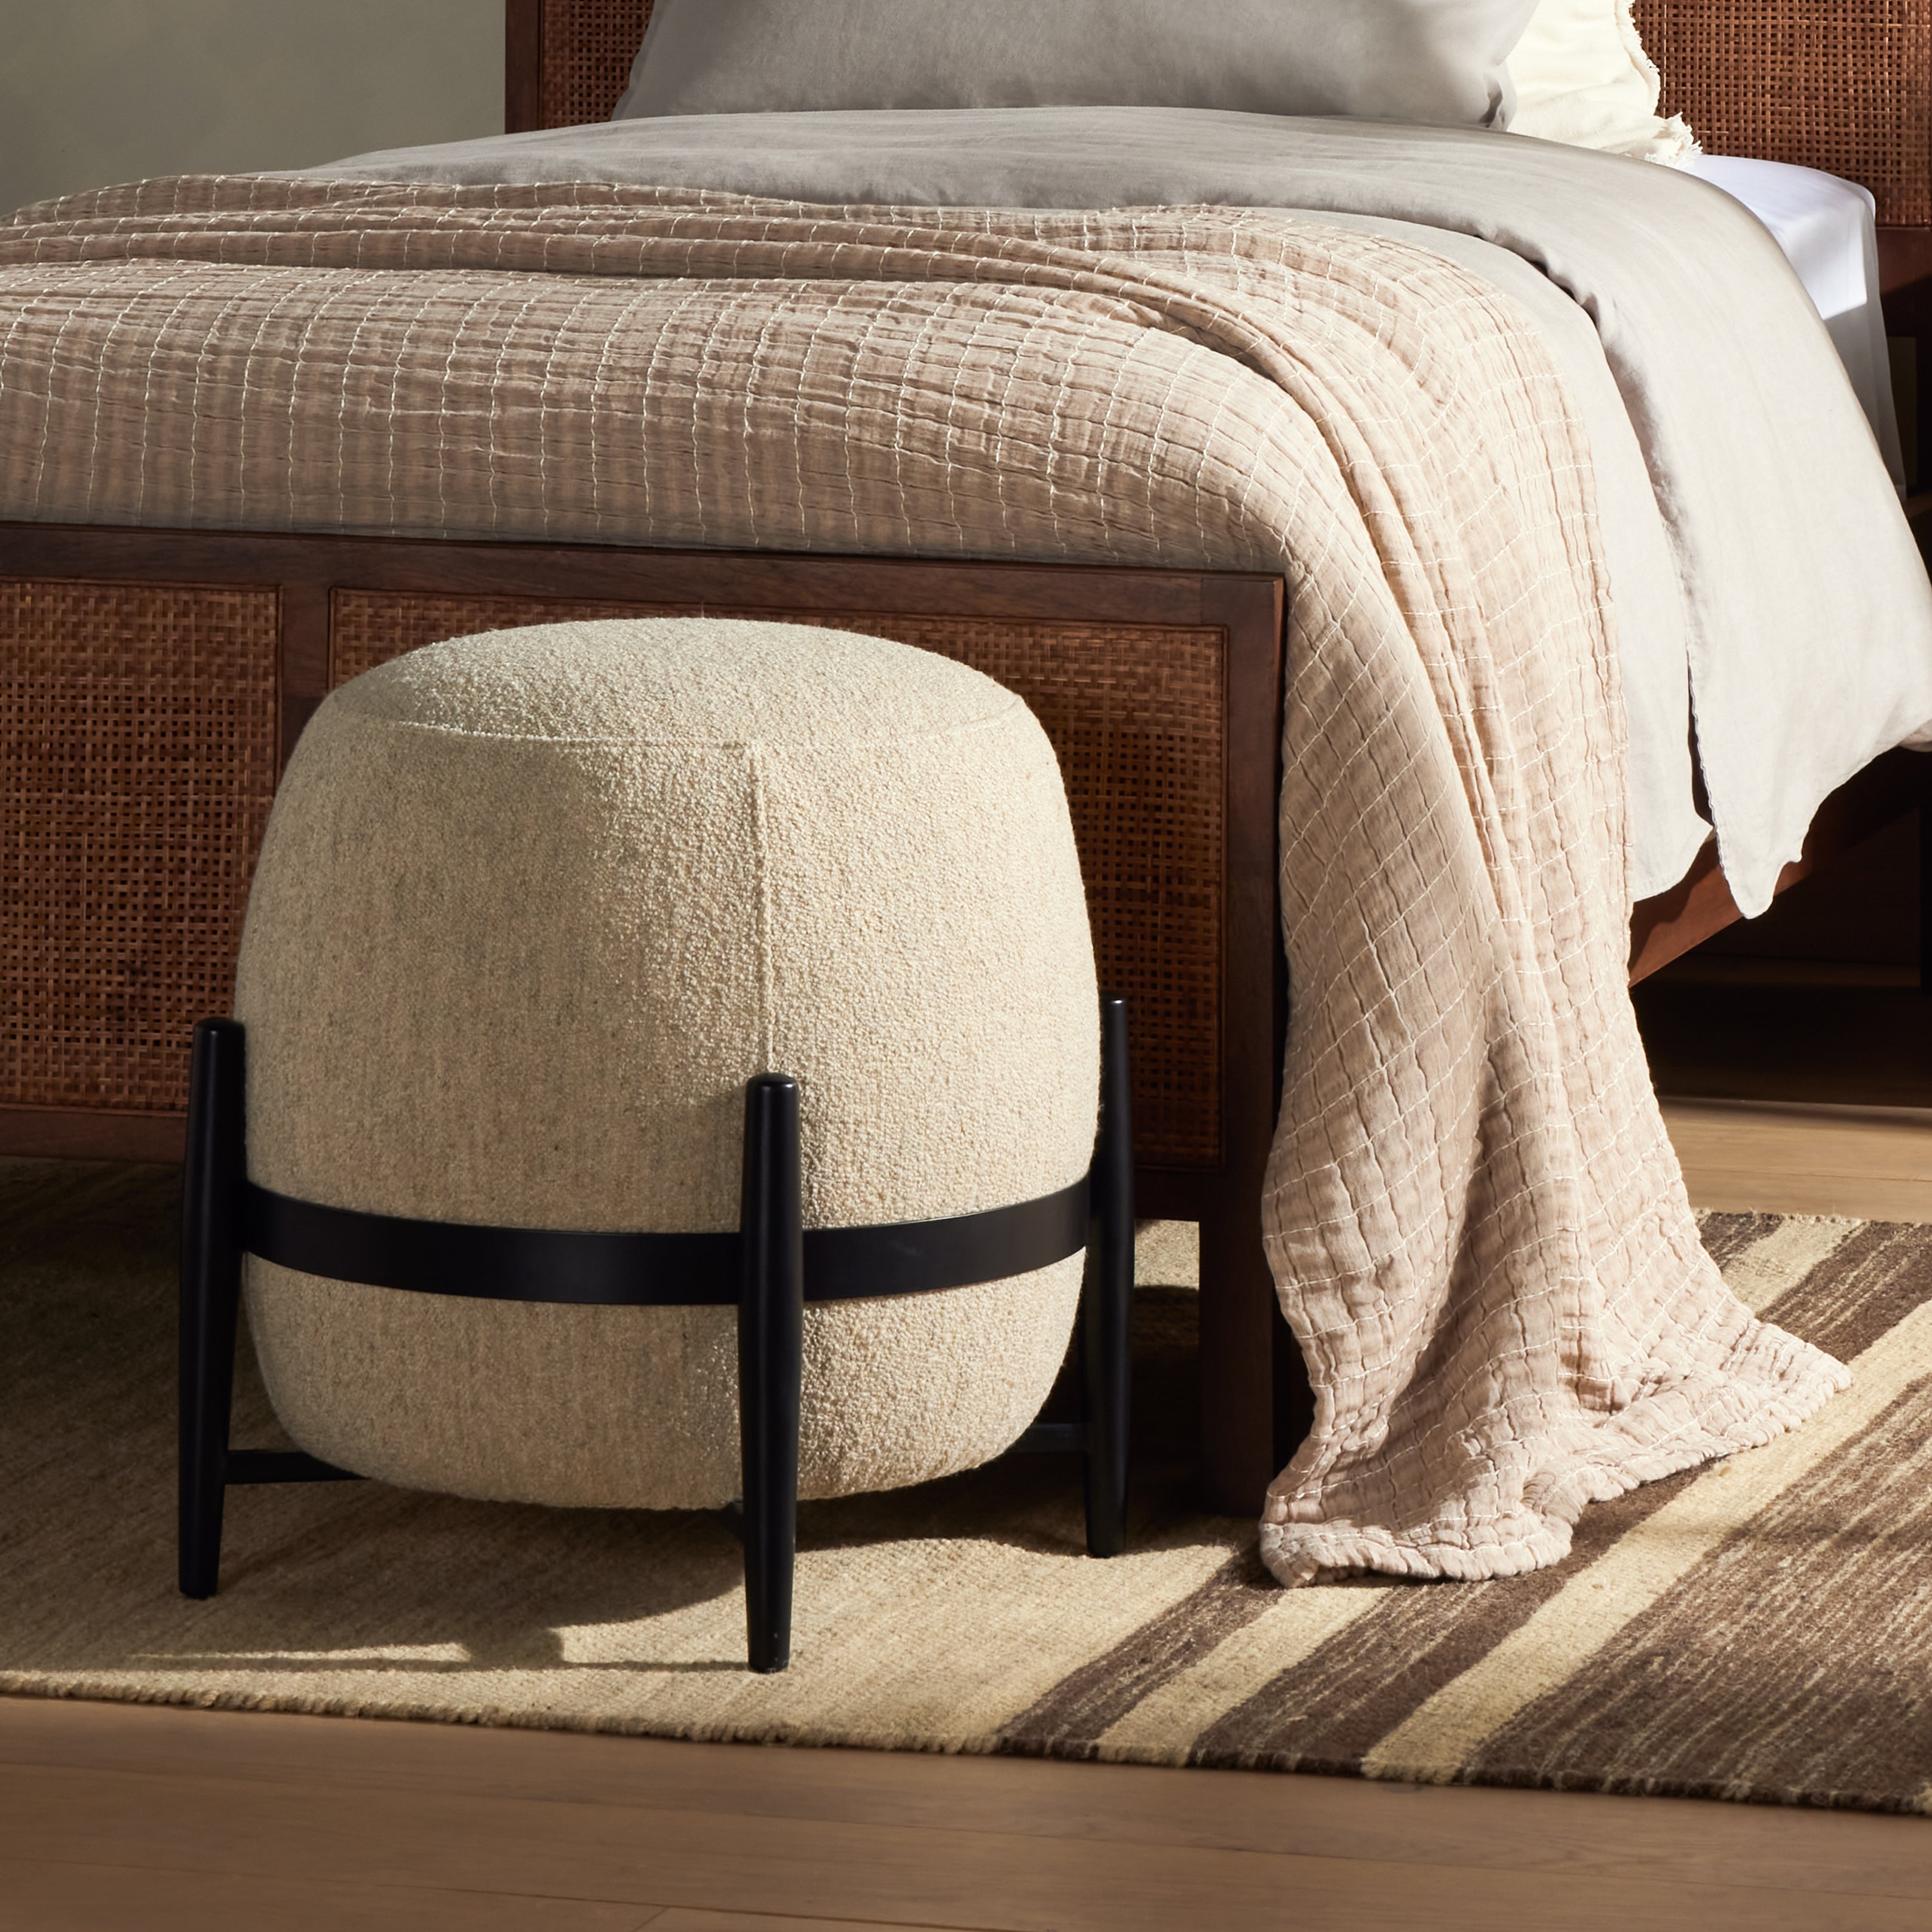 The Sia Athena Taupe Ottoman is beautifully shaped and perfect for relaxing on after a long day. It gives a retro, transitional look. Amethyst Home provides interior design services, furniture, rugs, and lighting in the Miami metro area.